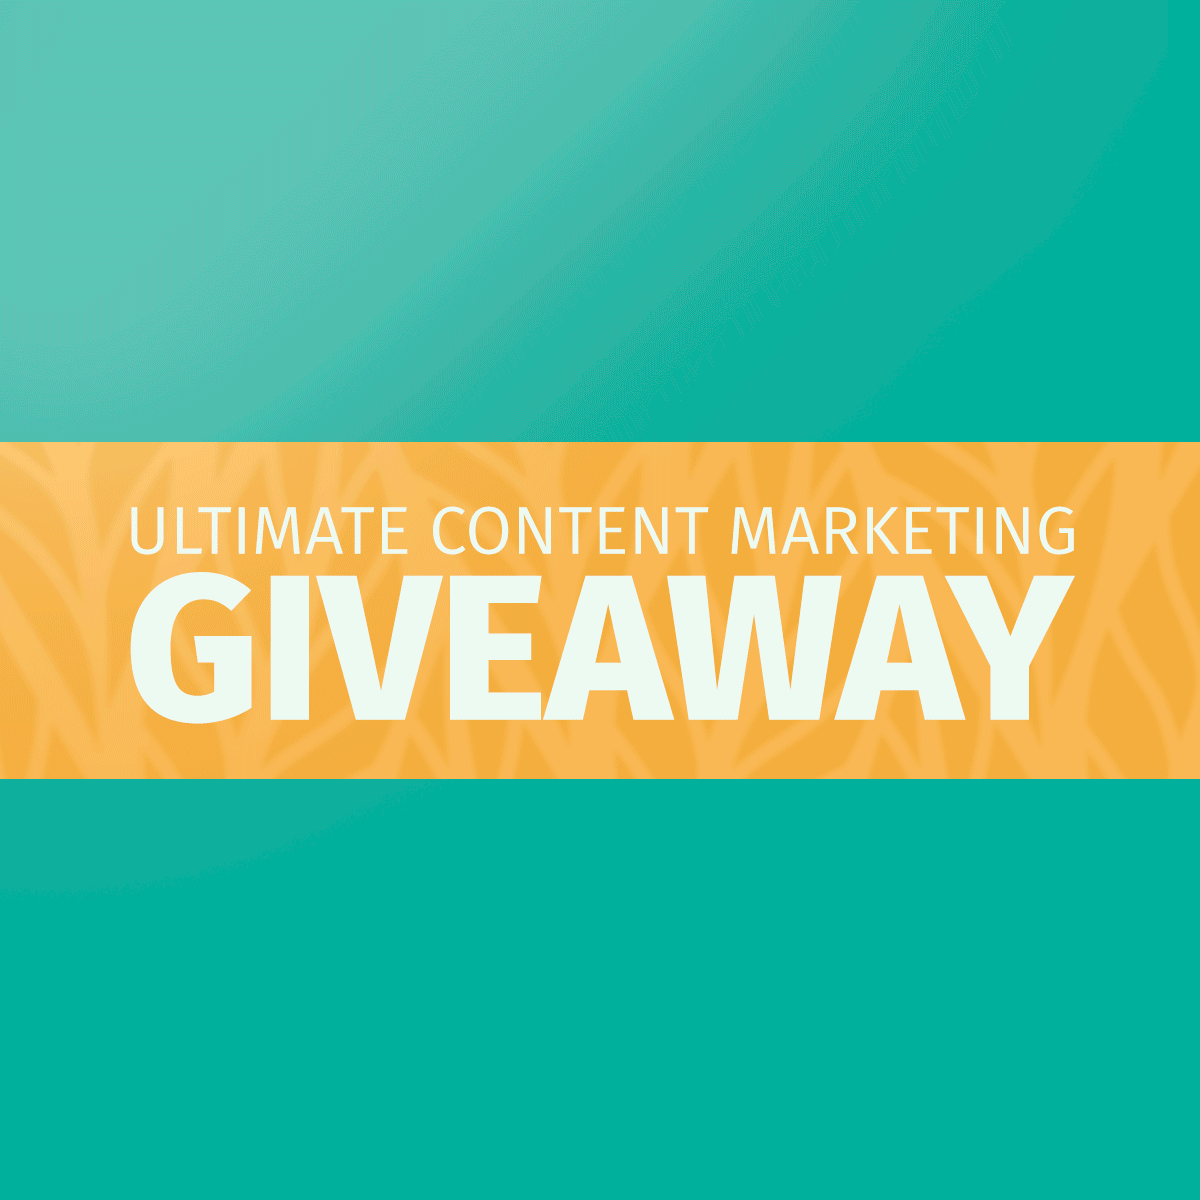 ultimate-content-marketing-giveaway-sq